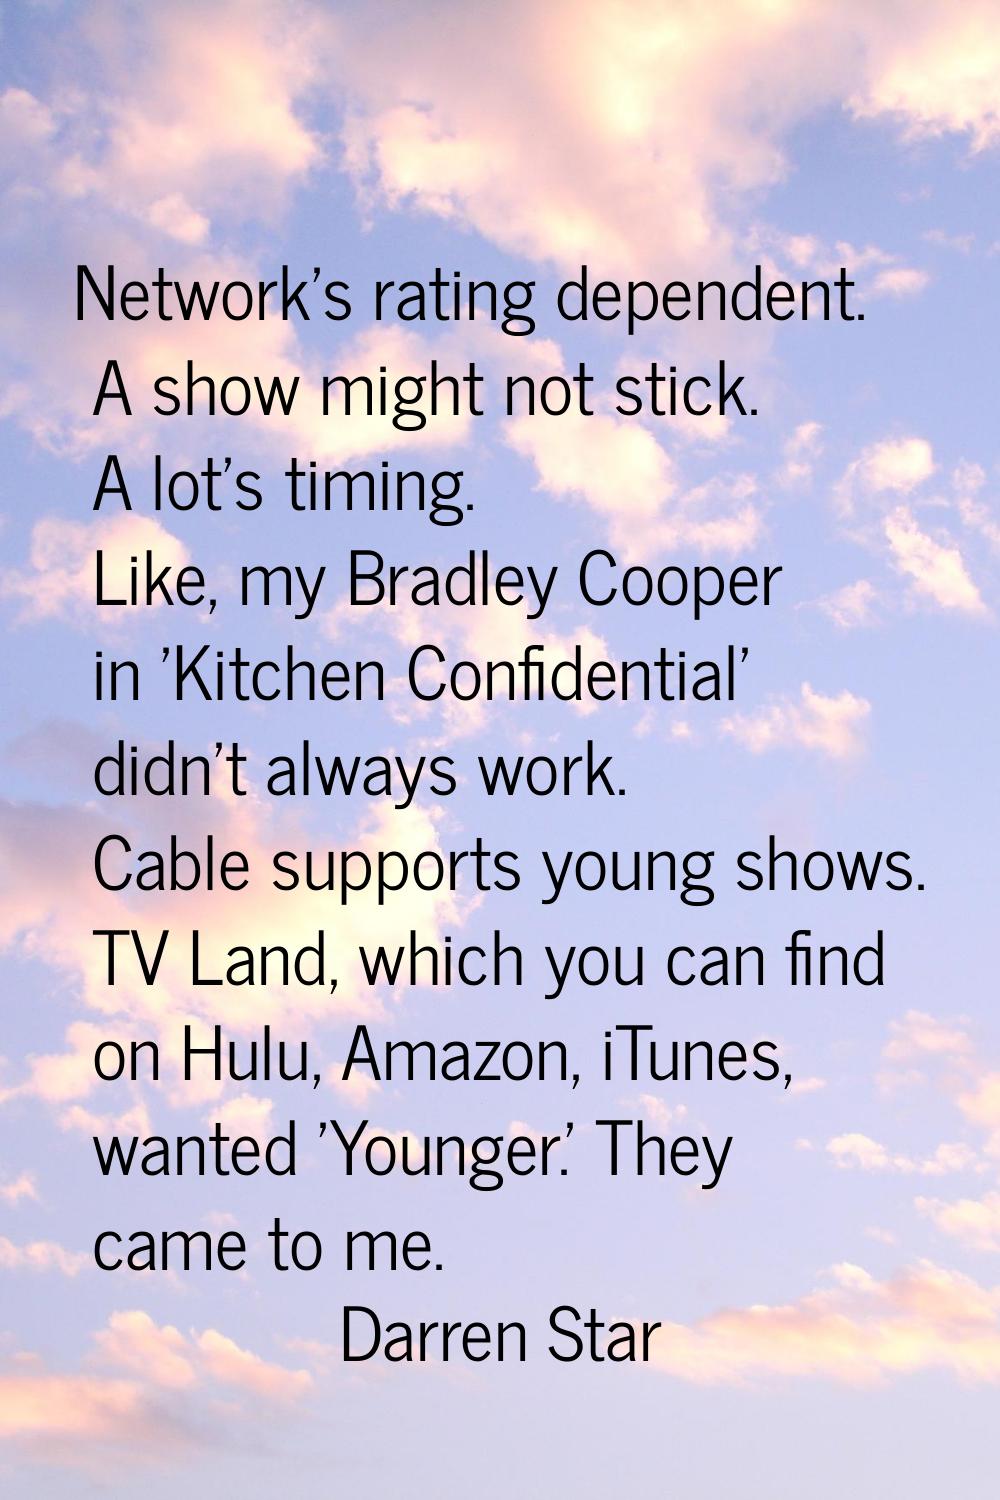 Network's rating dependent. A show might not stick. A lot's timing. Like, my Bradley Cooper in 'Kit